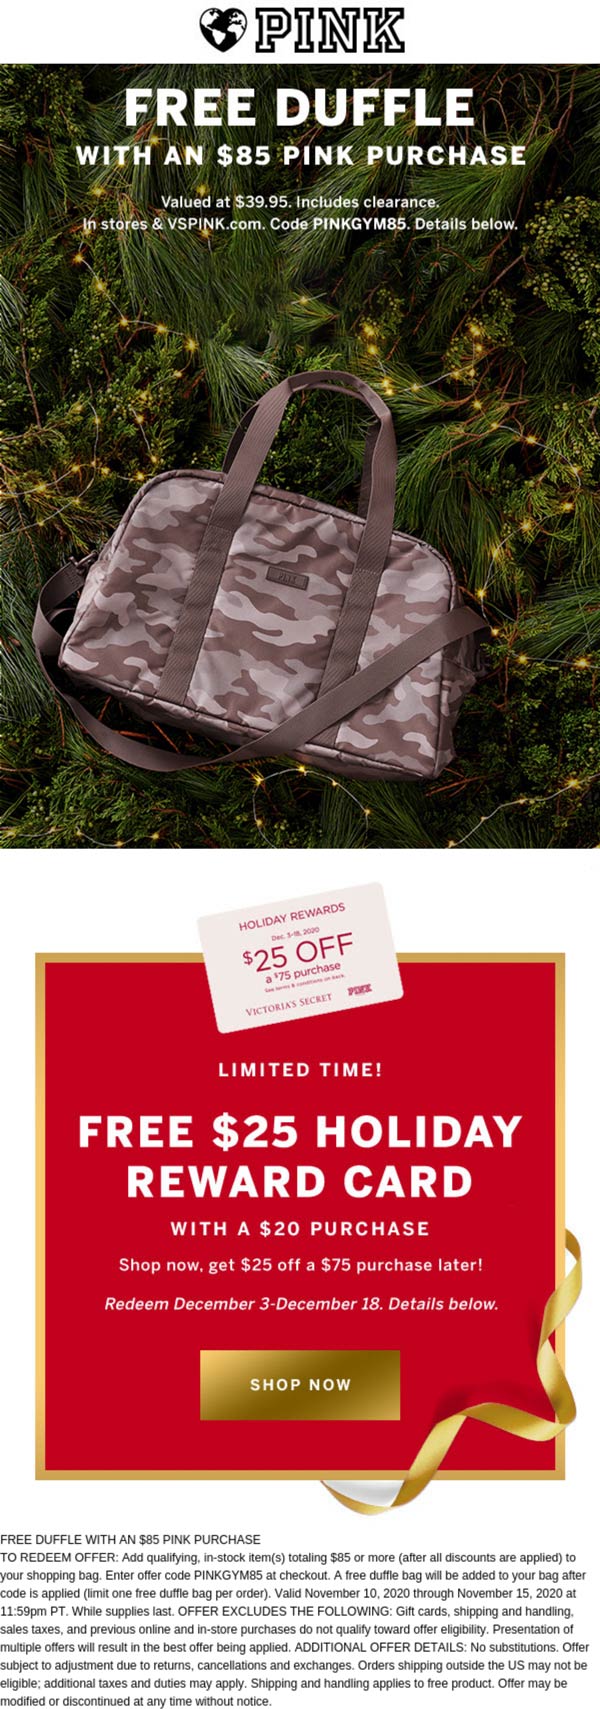 PINK stores Coupon  Free duffle bag with $85 spent at PINK, or online via promo code PINKGYM85 #pink 